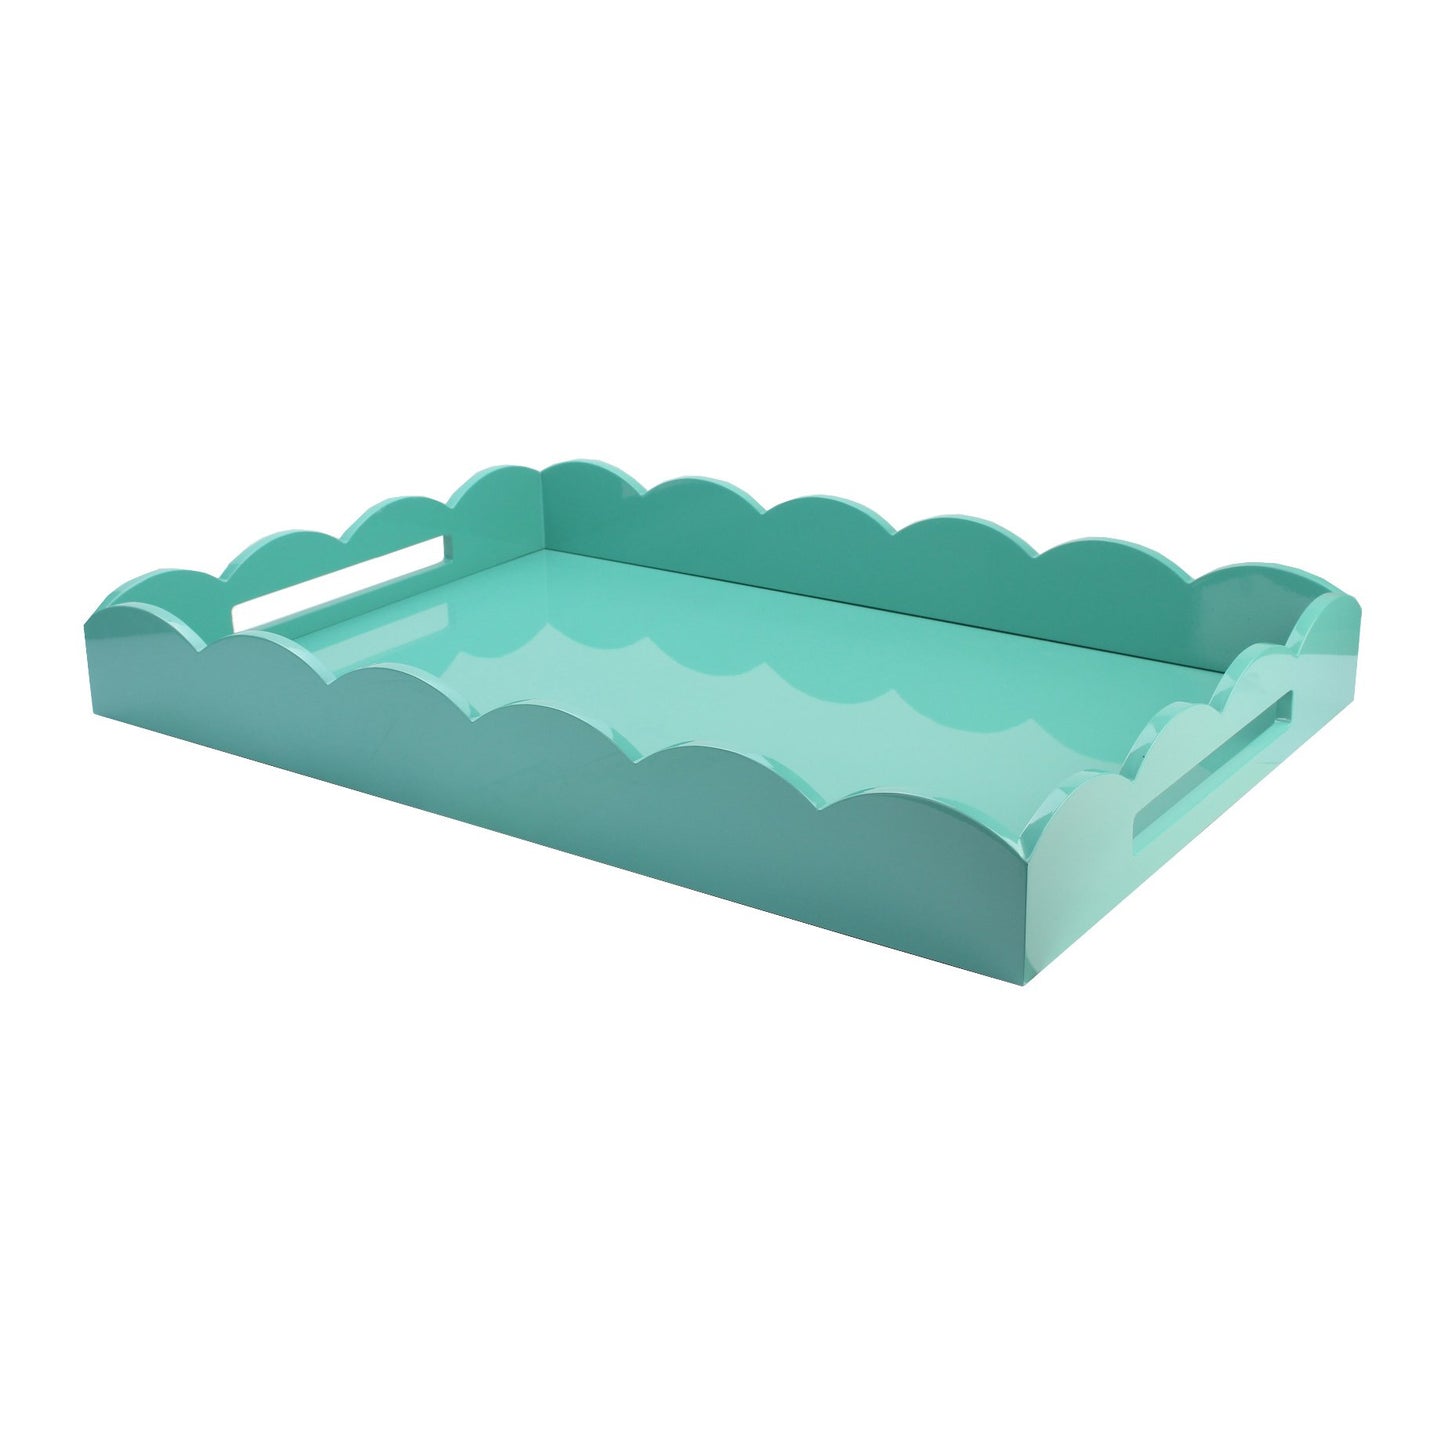 Turquoise Large Lacquered Scallop Ottoman Tray